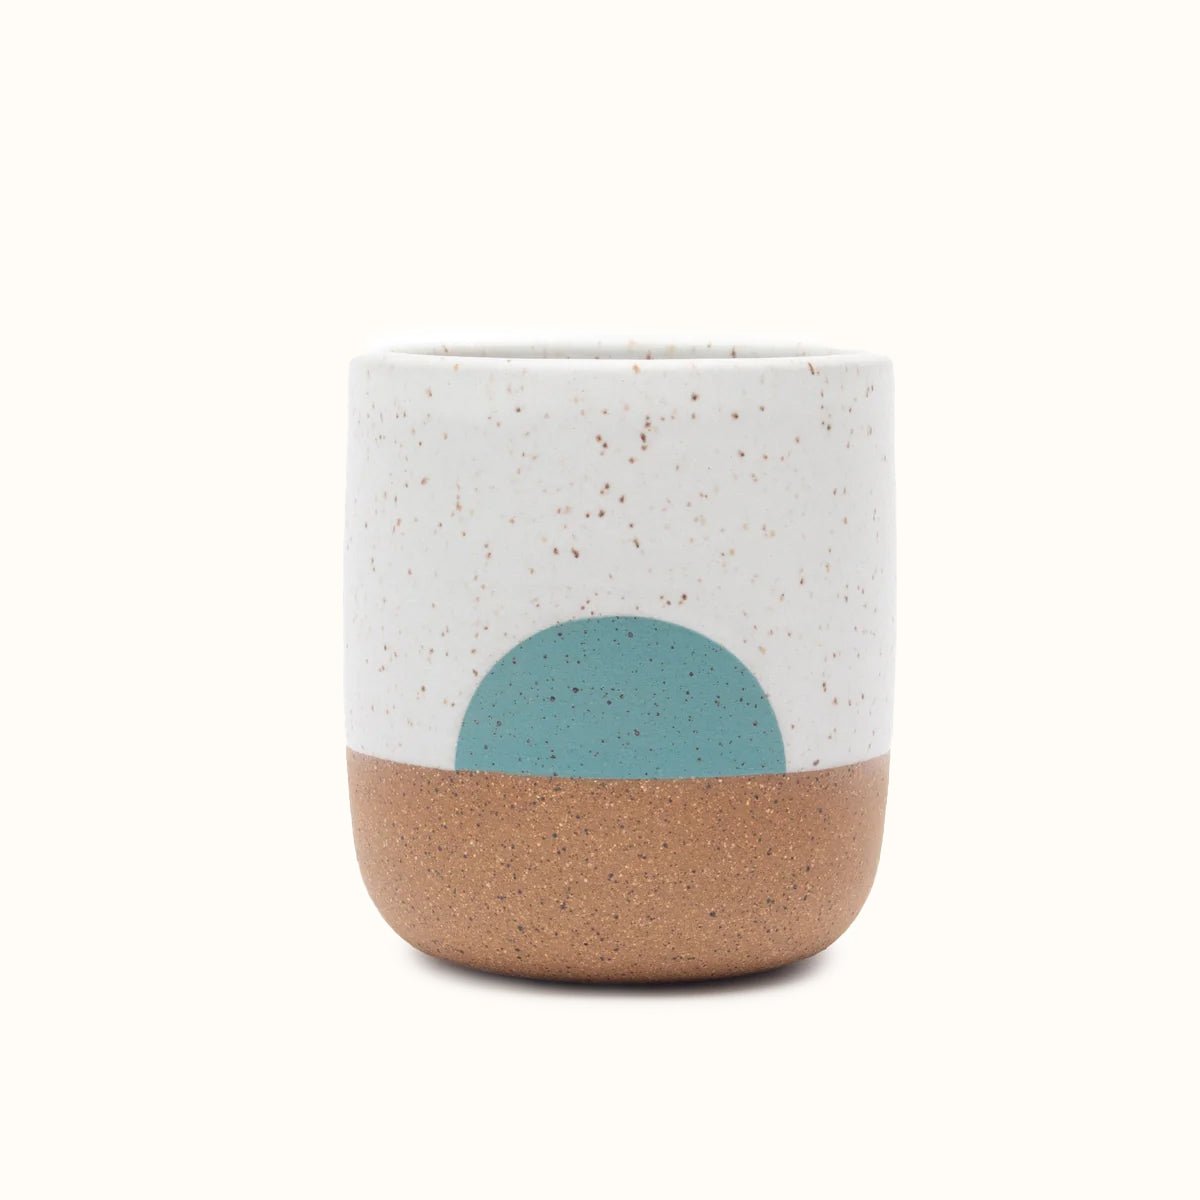 Speckled stoneware handless mug with white satin glaze collar and teal concentric design. Designed and hand thrown by Wolf Ceramics in Hood River, OR.